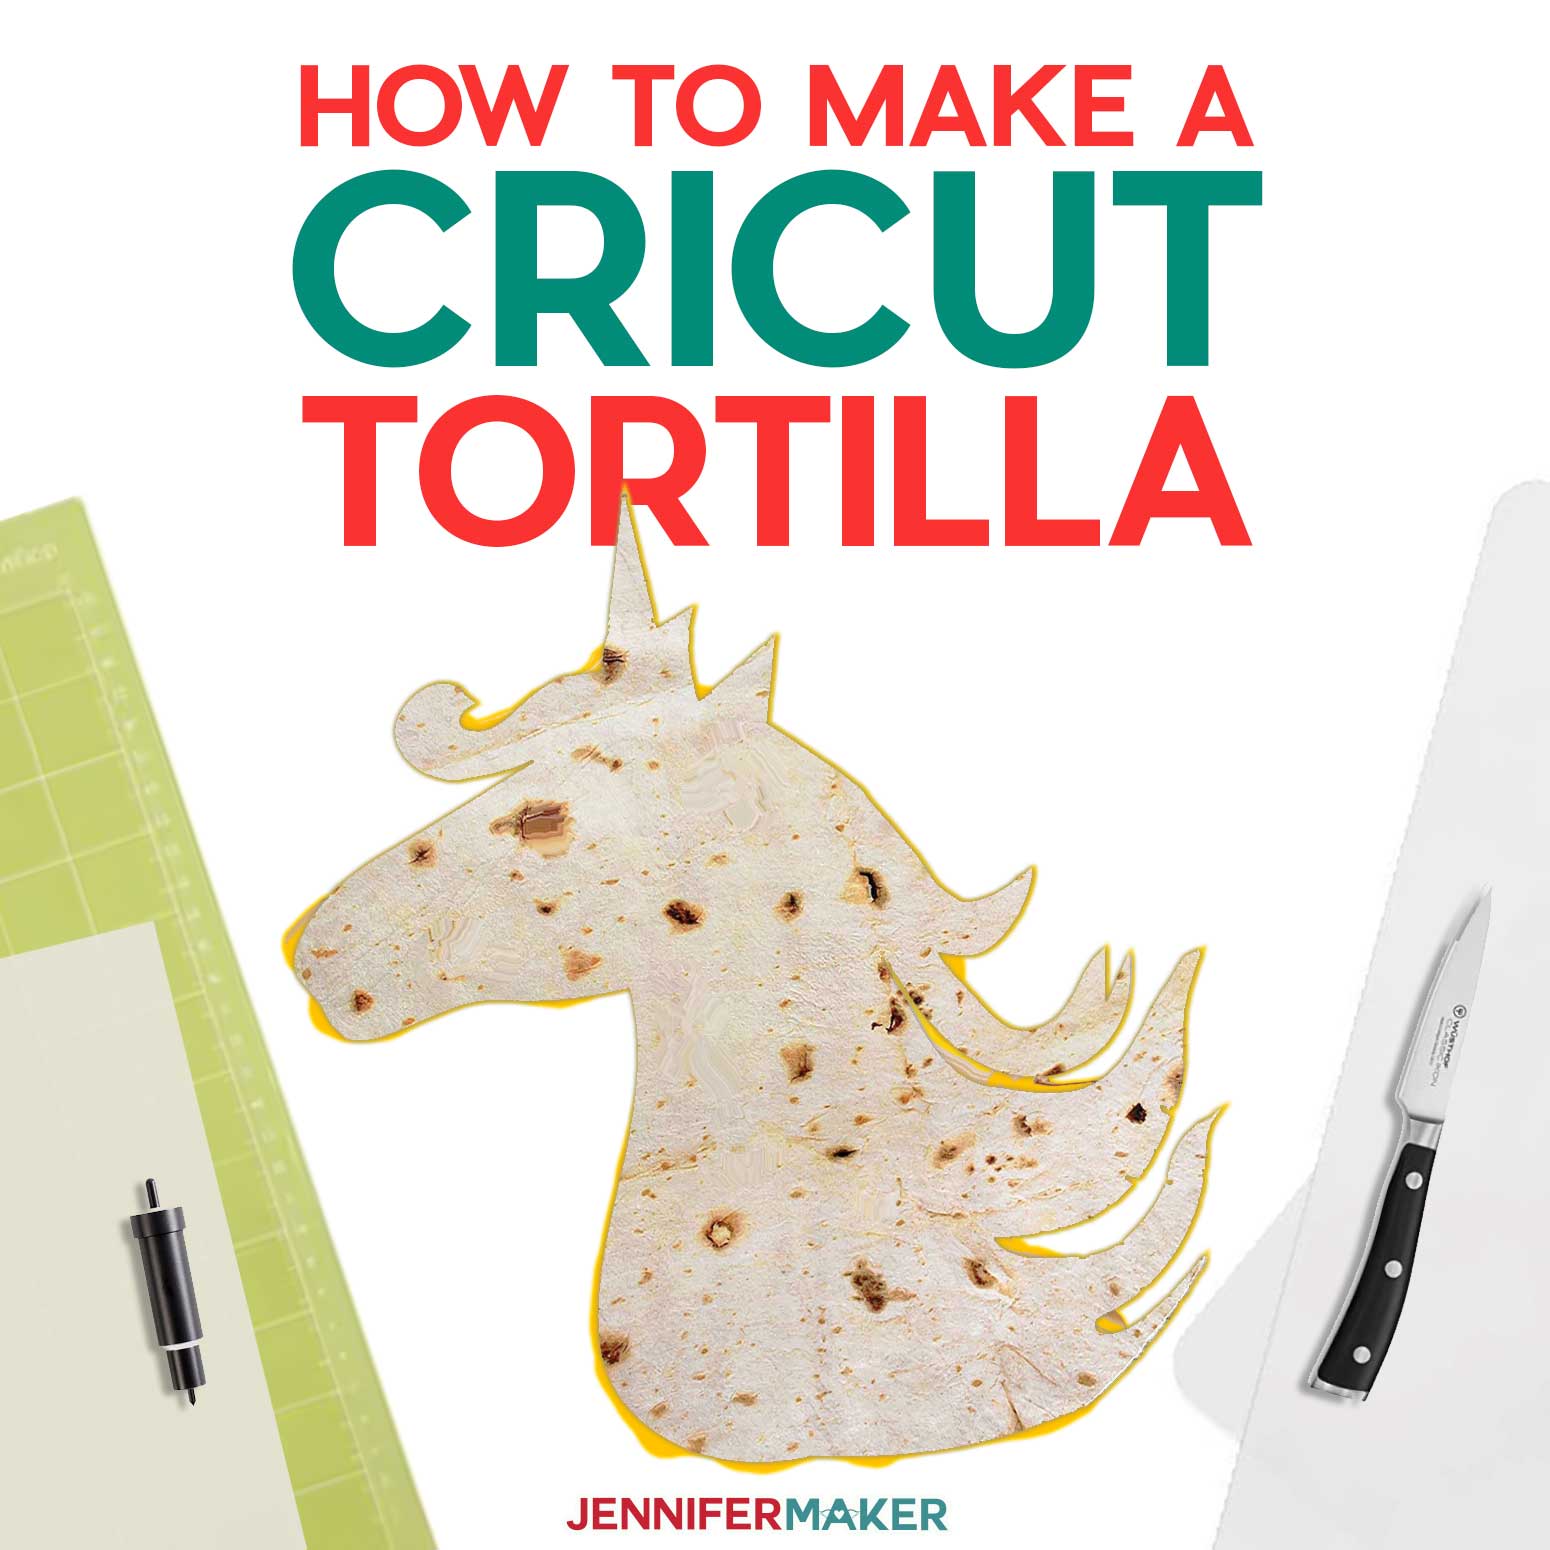 Cricut Tortilla: How to Safely Cut Food with Your Cricut’s Help!